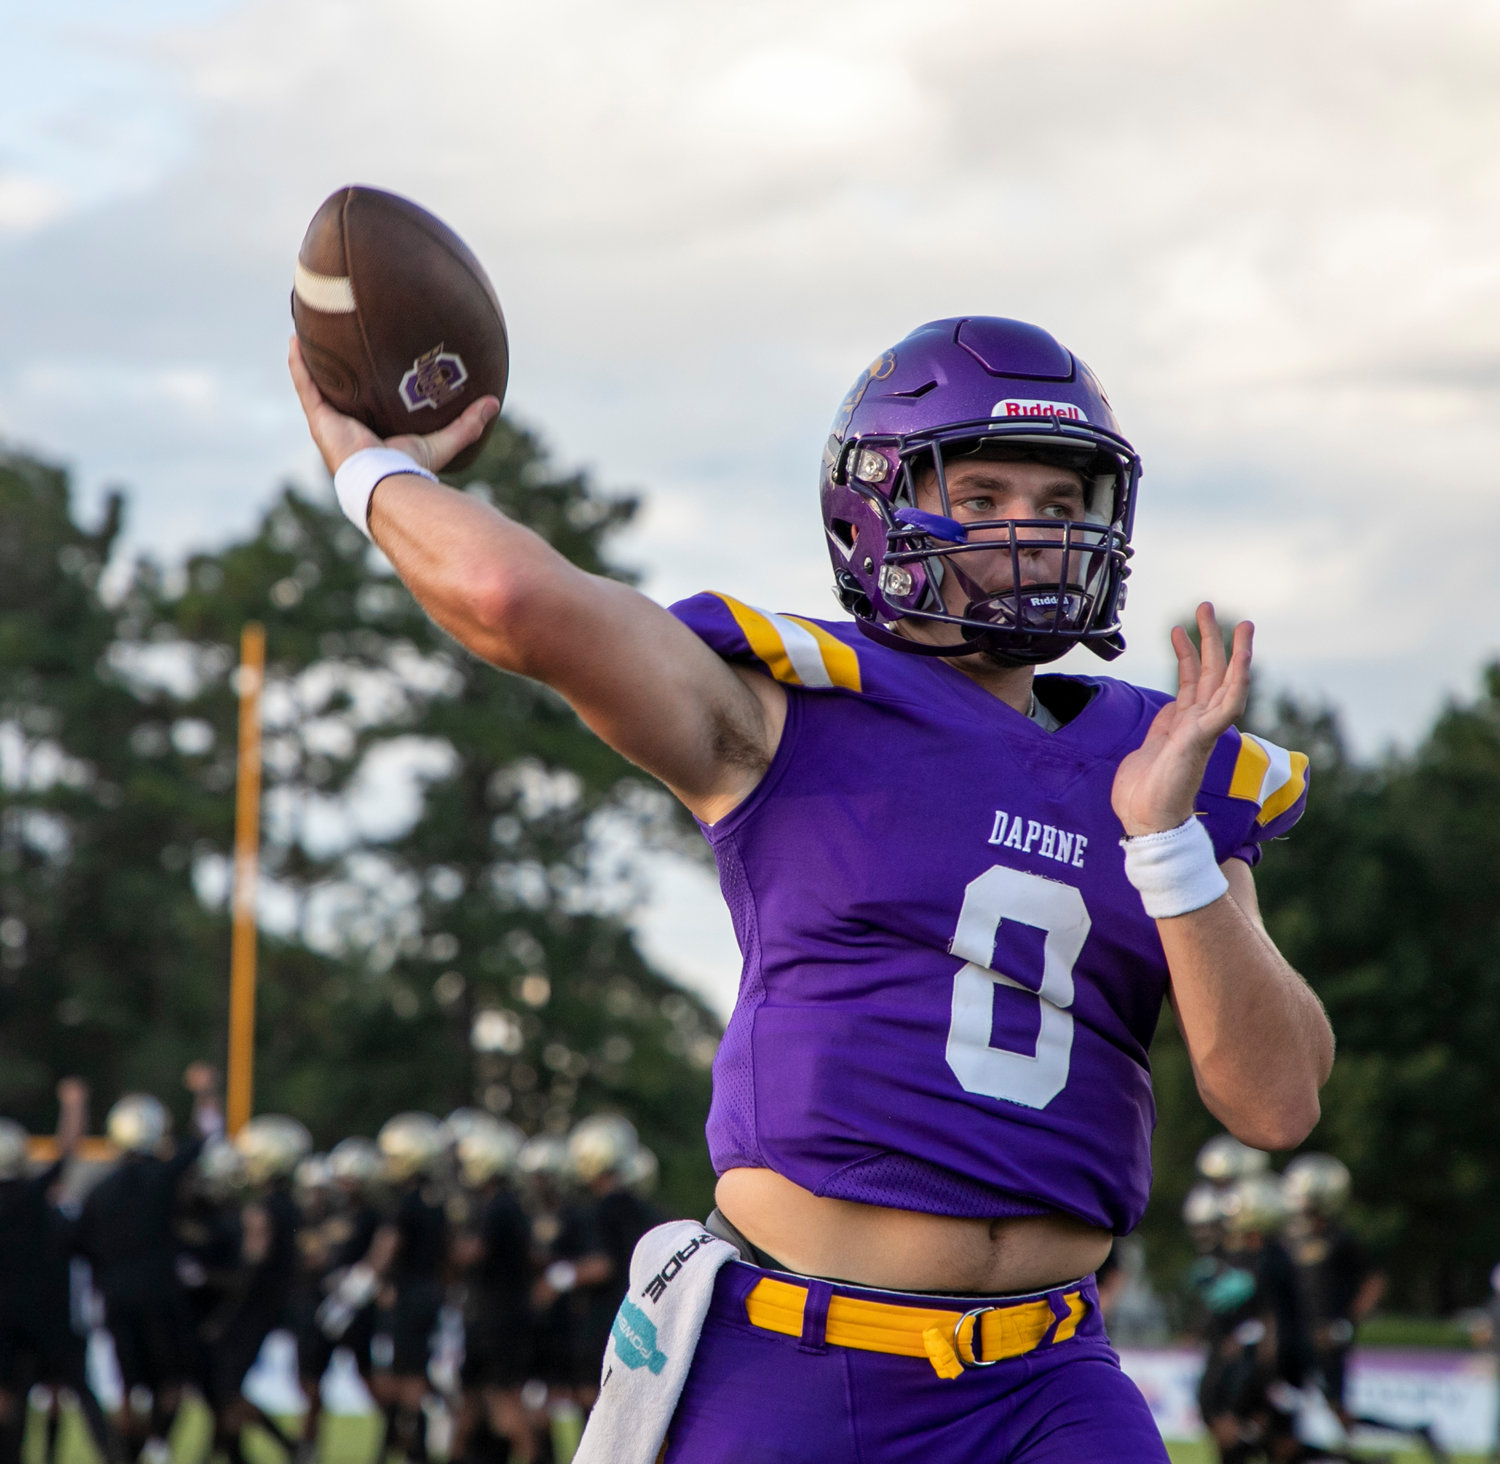 Daphne quarterback Gabe Reynolds warms up ahead of the Trojans’ region contest against the Davidson Warriors at home Sept. 9. Daphne travels to Spanish Fort for its non-region game this Friday as the lone contest between two Baldwin County teams.